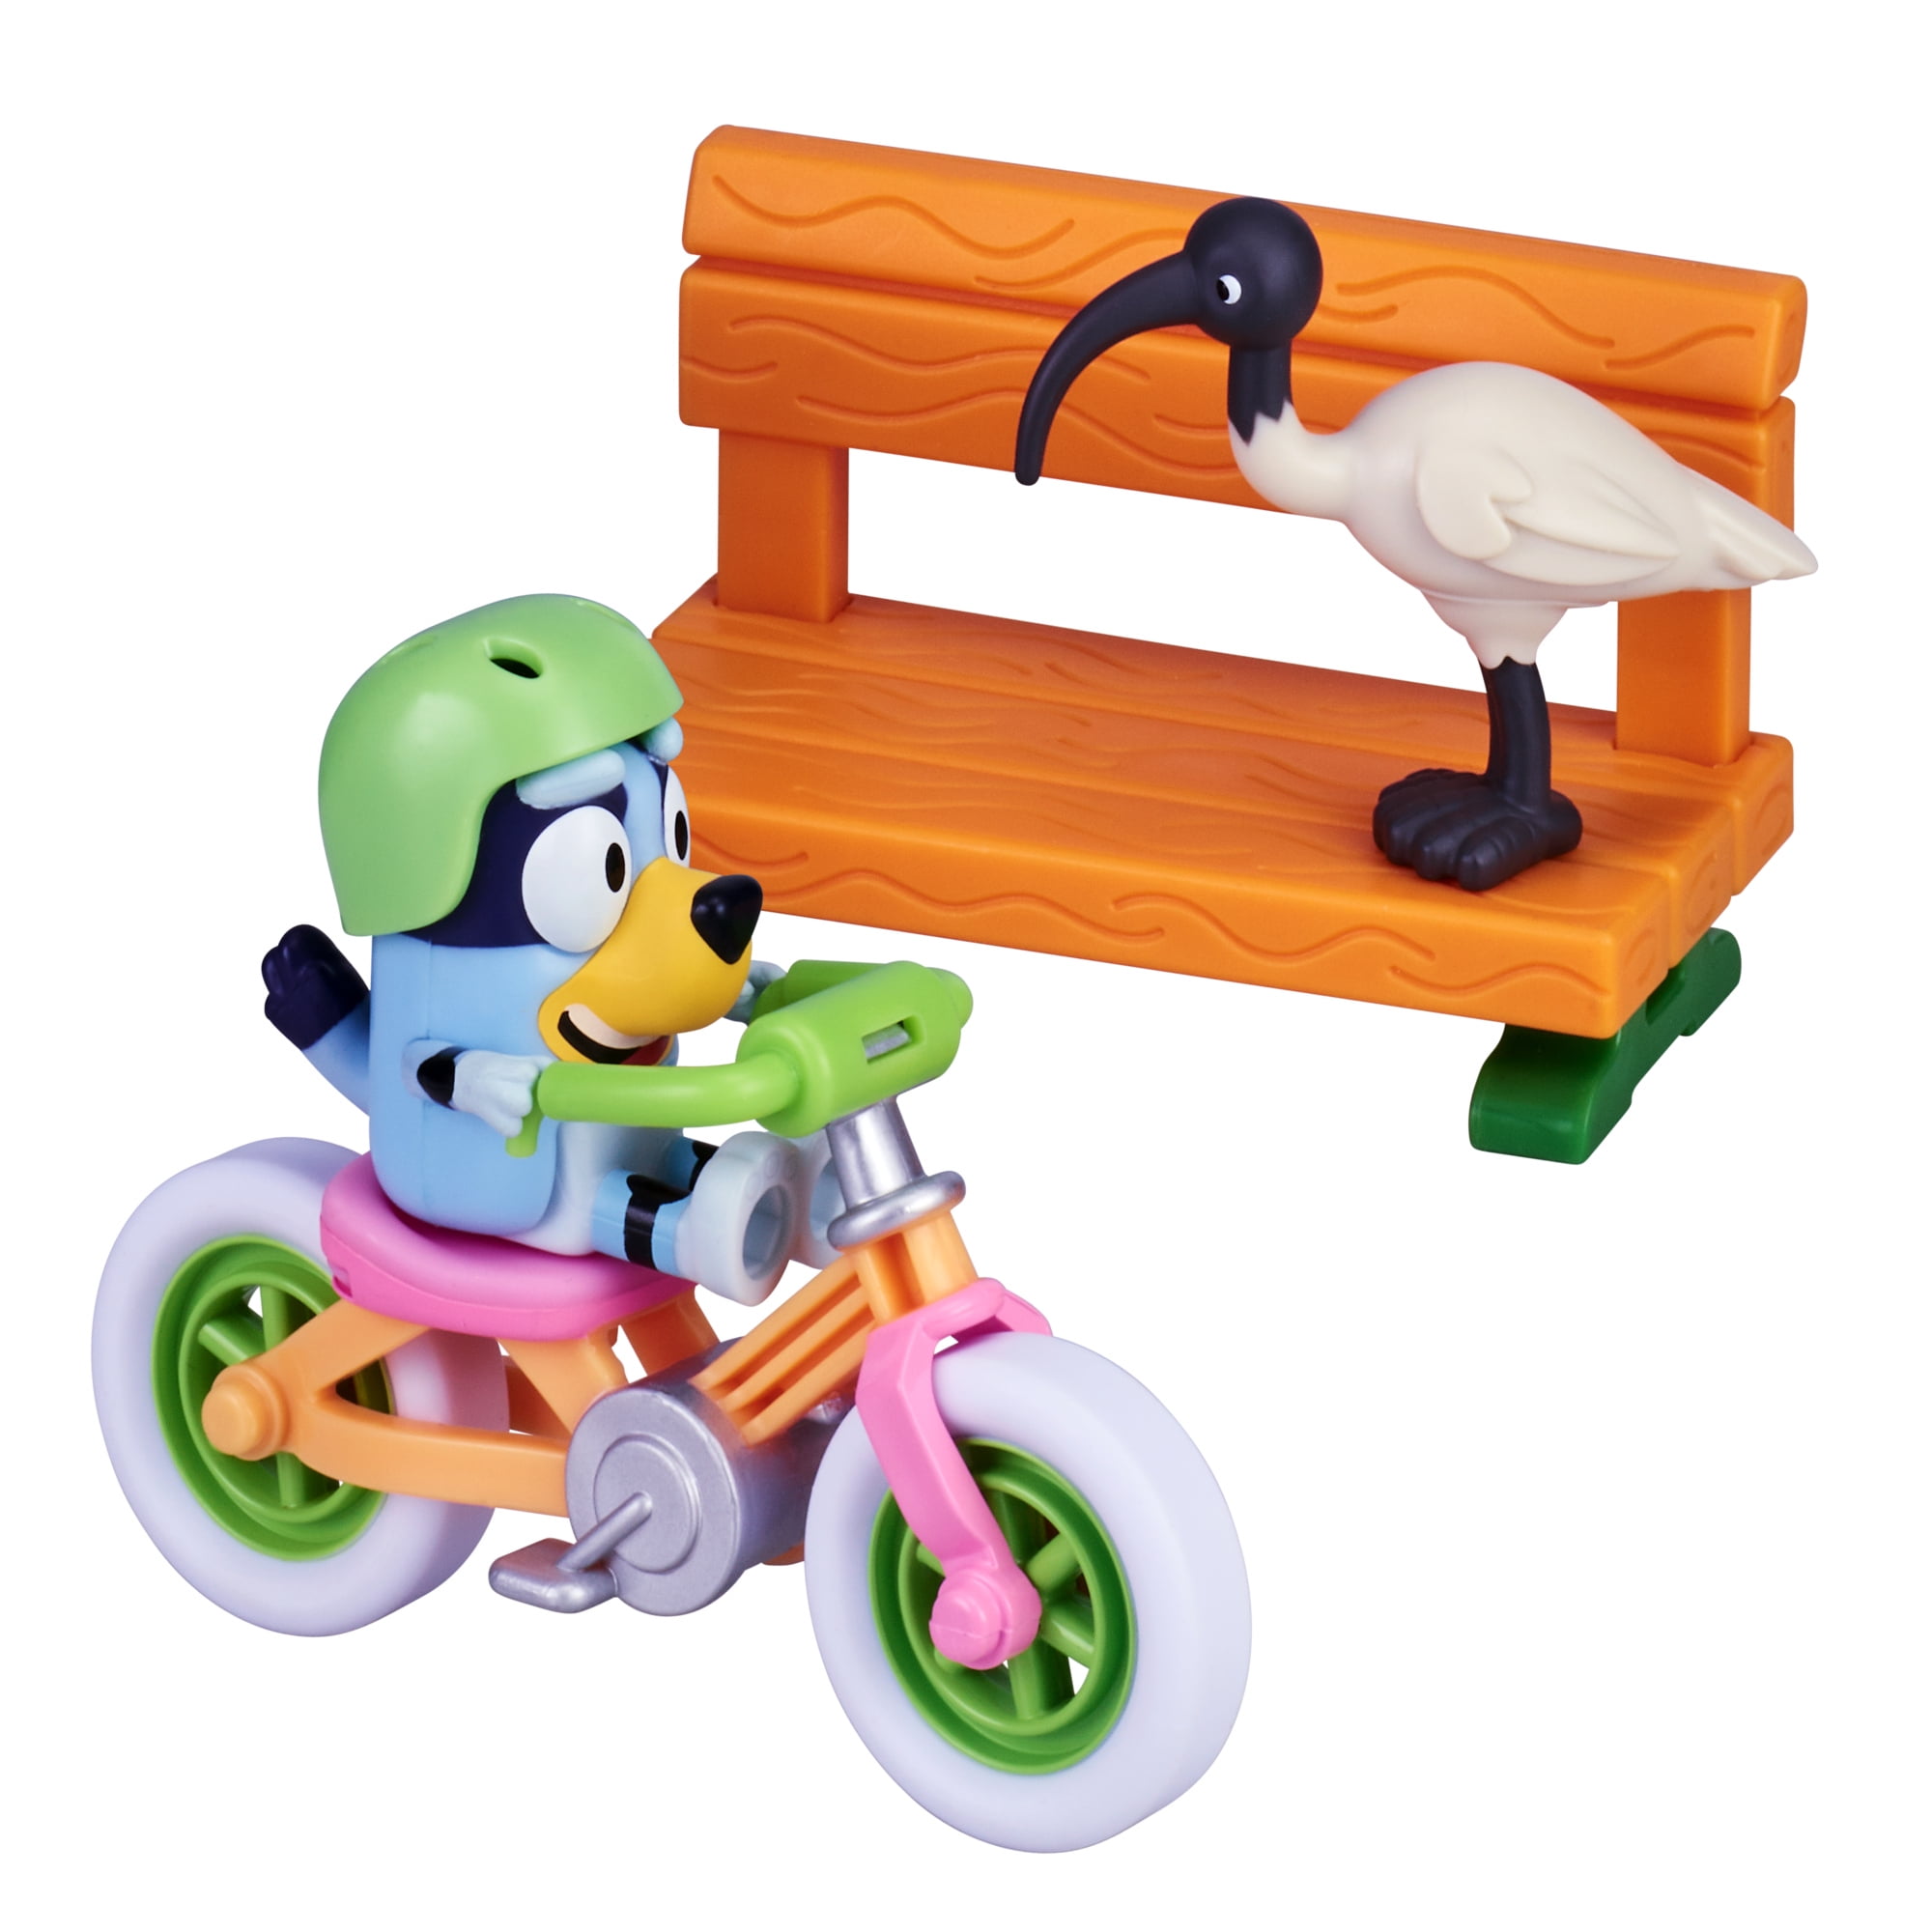 Bluey, Bluey and Bicycle Vehicle and Figure Pack, 2.5-3 inch Figure, Preschool, Ages 3+